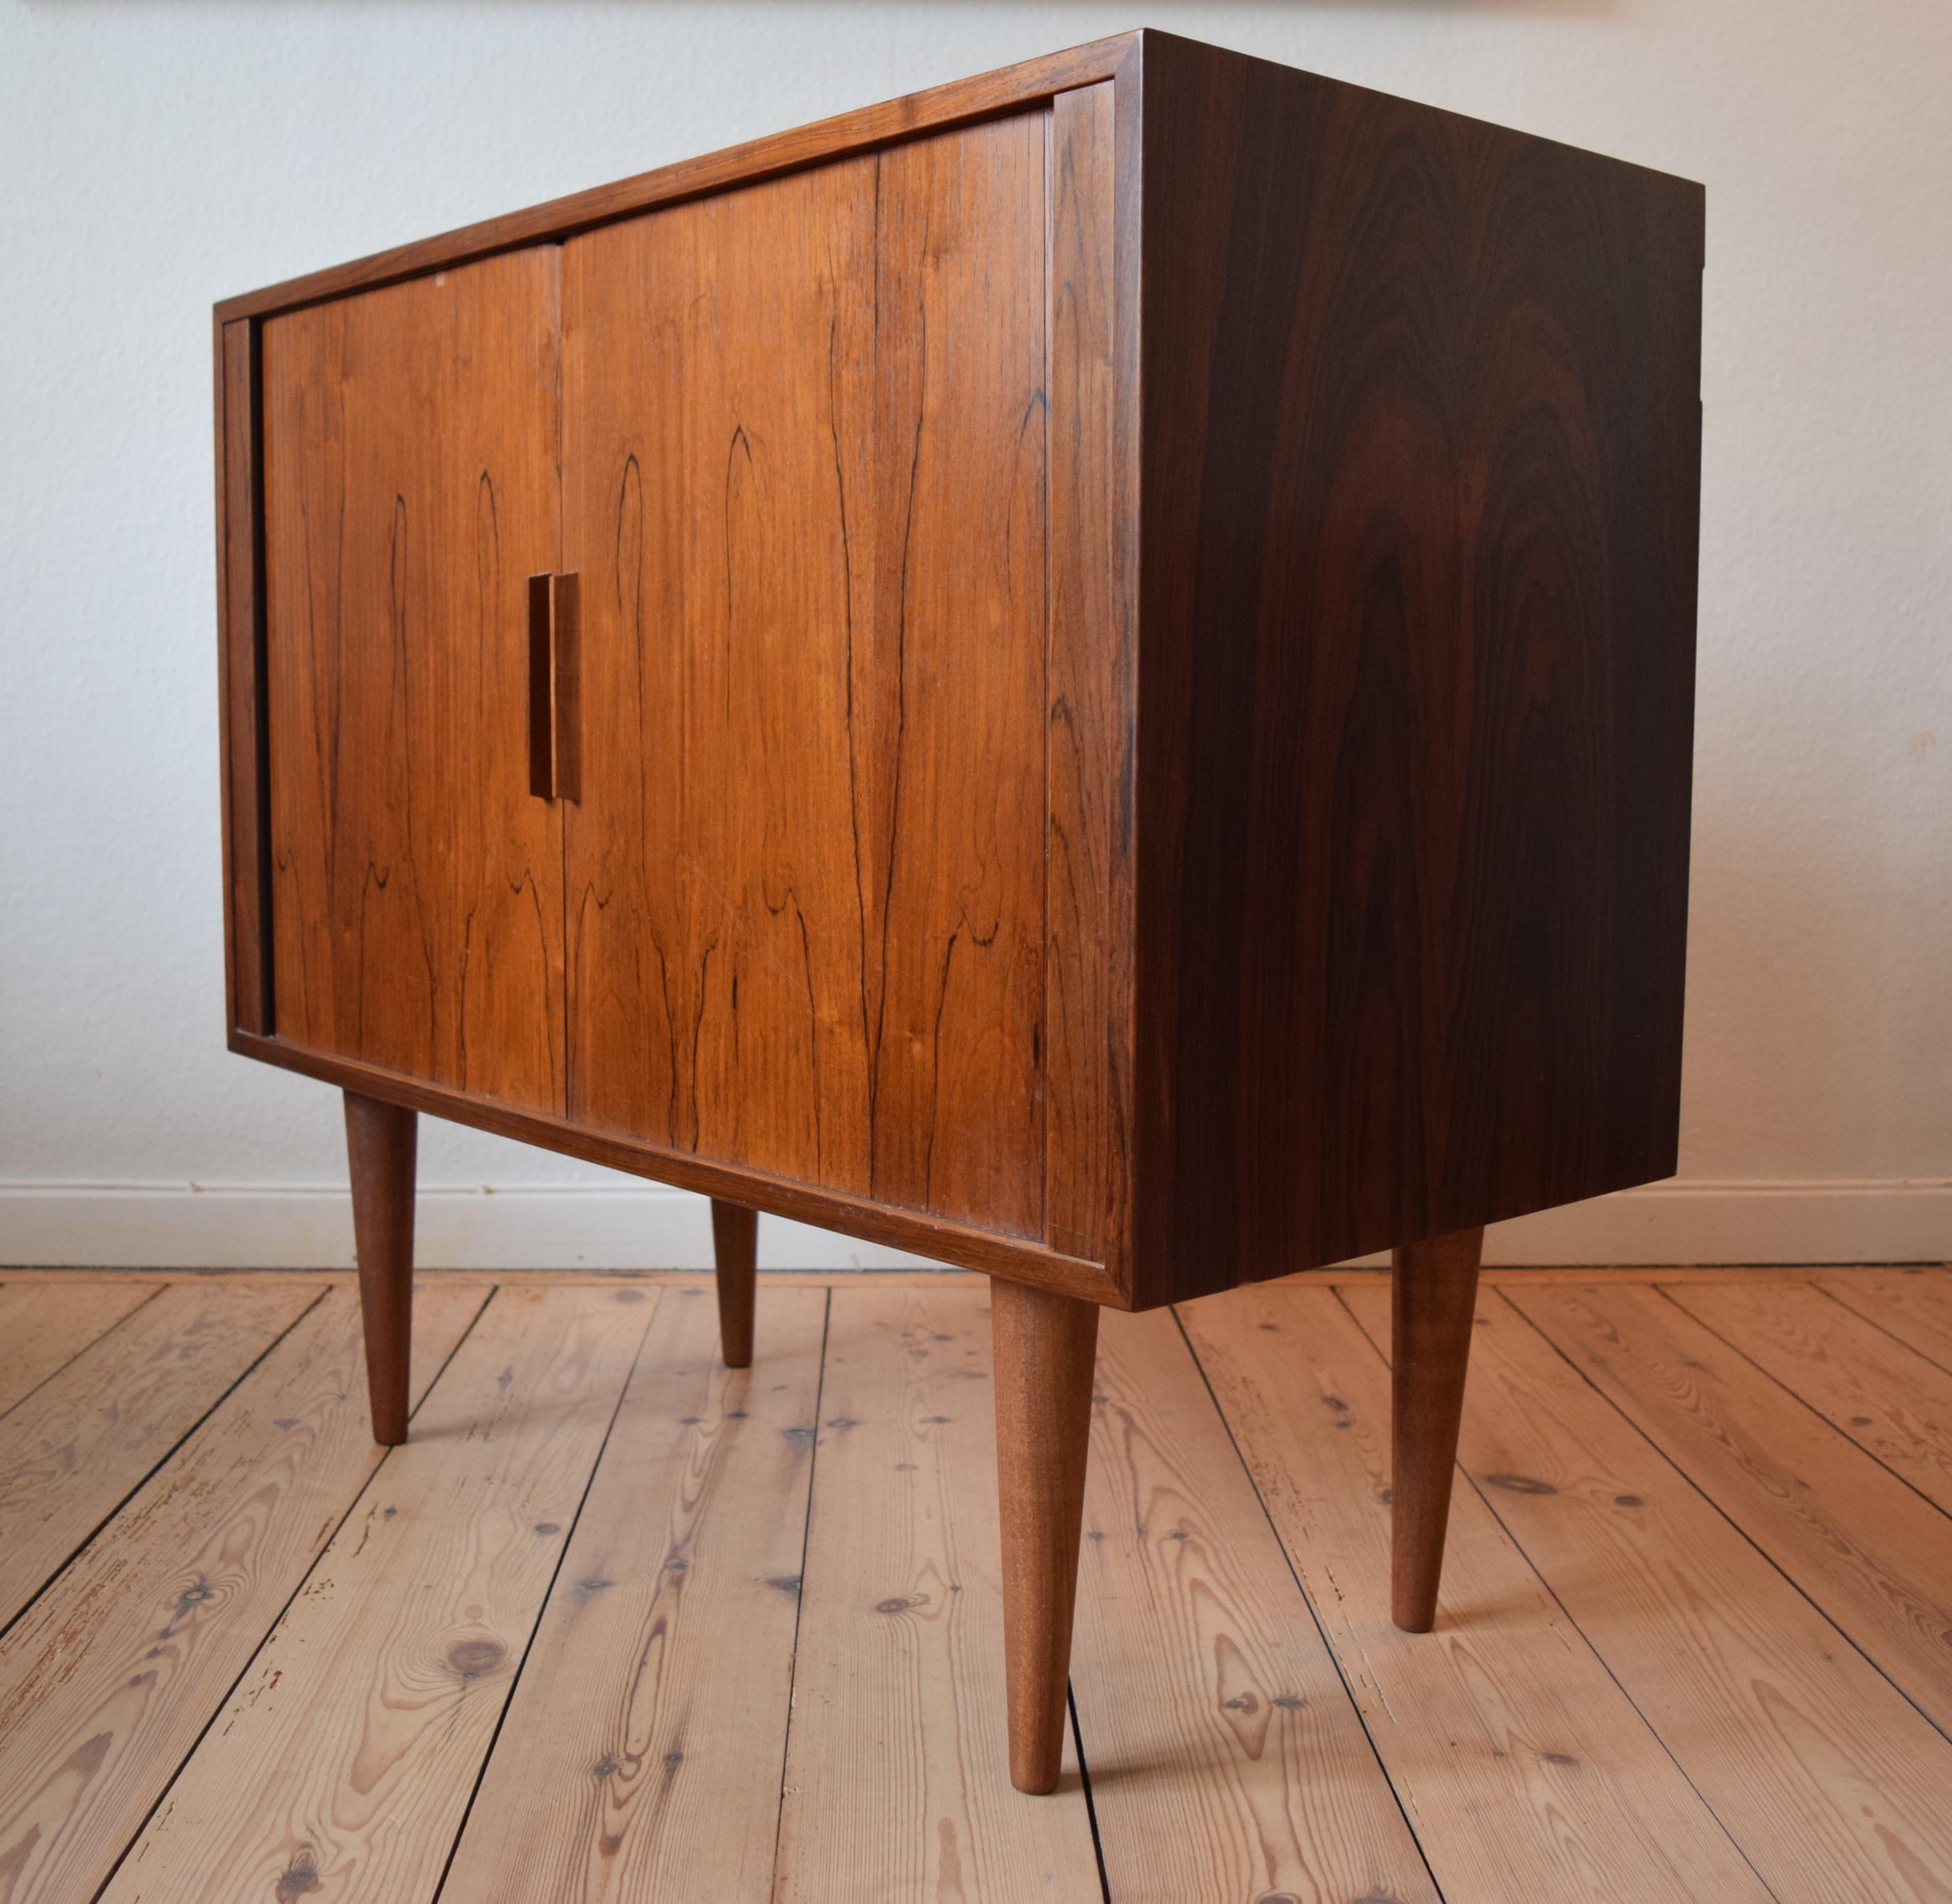 Danish rosewood cabinet by Kai Kristiansen for FM Møbler. Manufactured in the 1960s, this piece features two tambour doors with internal shelf and teak sliding drawer. Sits on turned and tapered solid rosewood legs. Striking rosewood grain